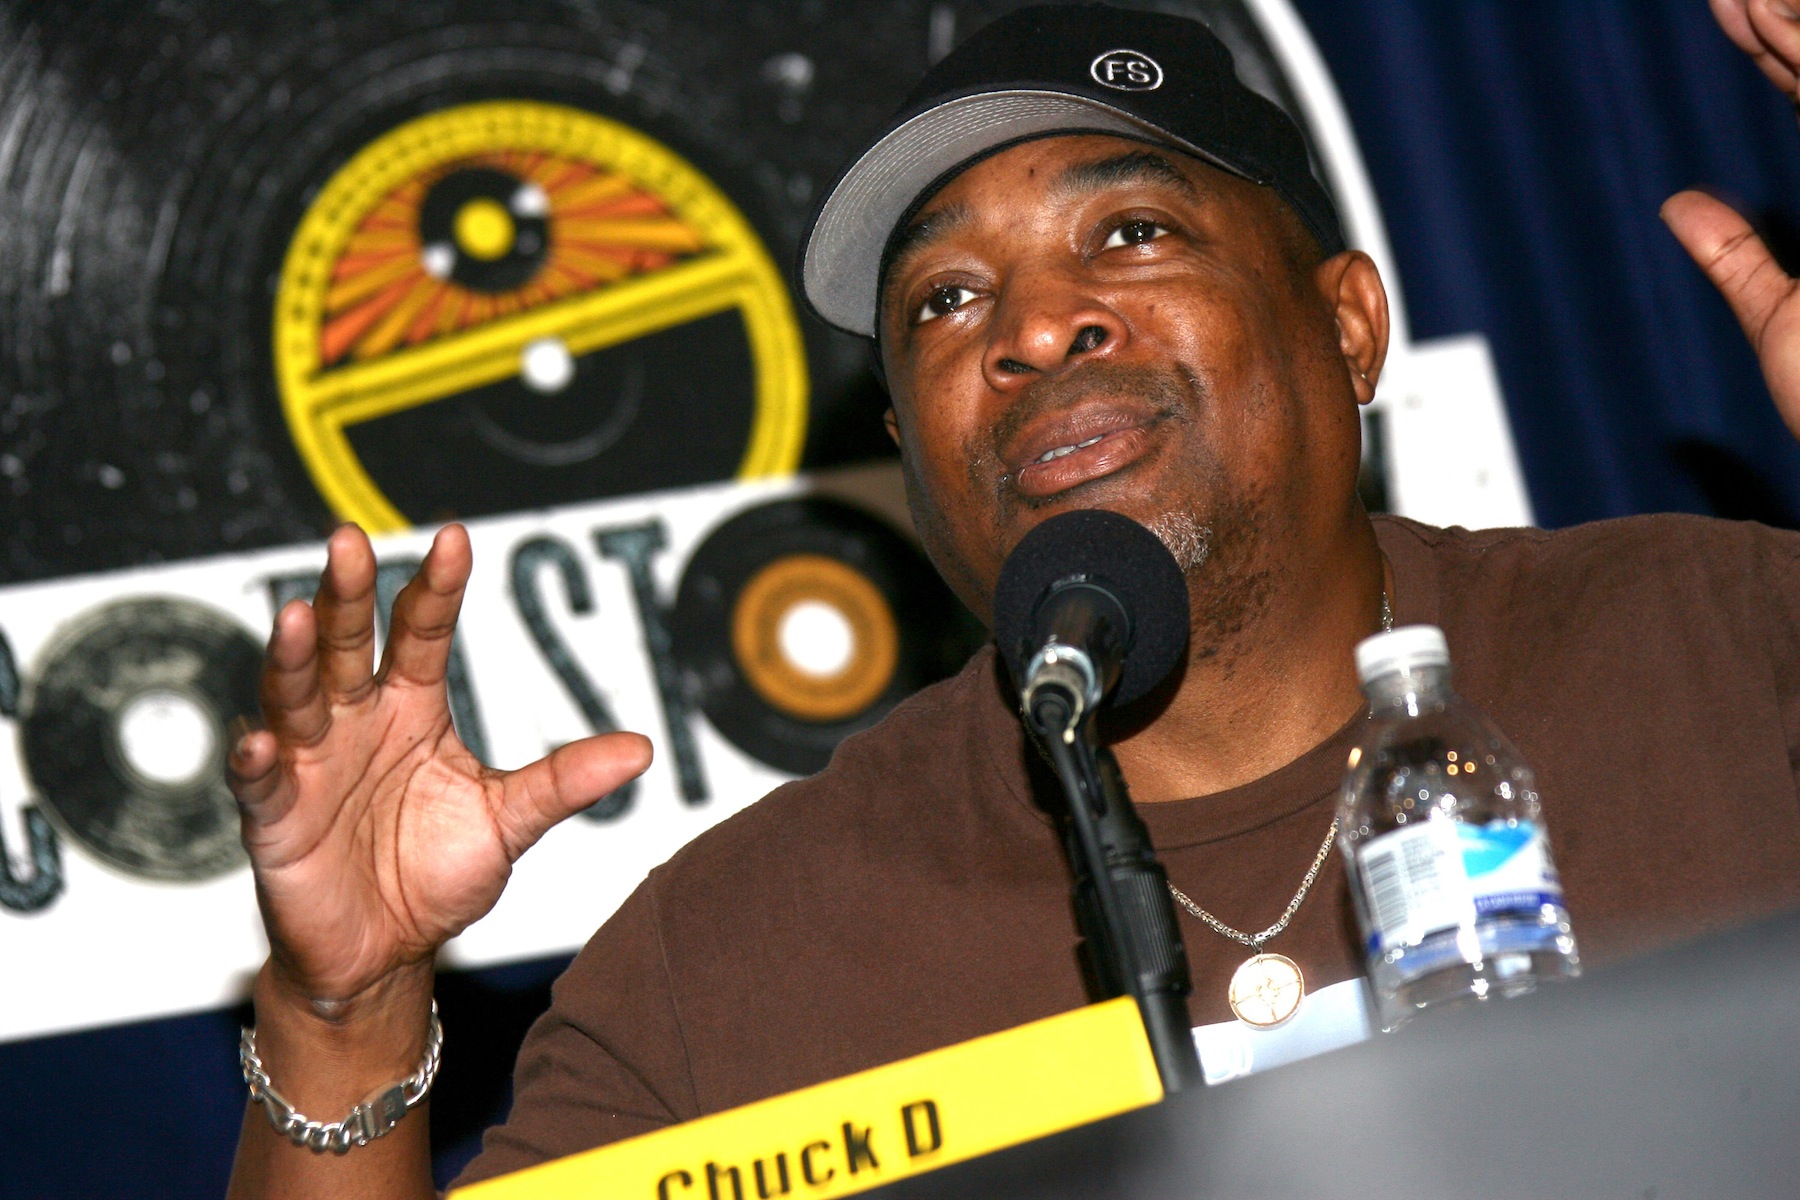 Rapper Chuck D attends the Record Store Day LA press conference 2014 held at Amoeba Music on March 20, 2014 in Hollywood, Calif. (Tommaso Boddi / WireImage)